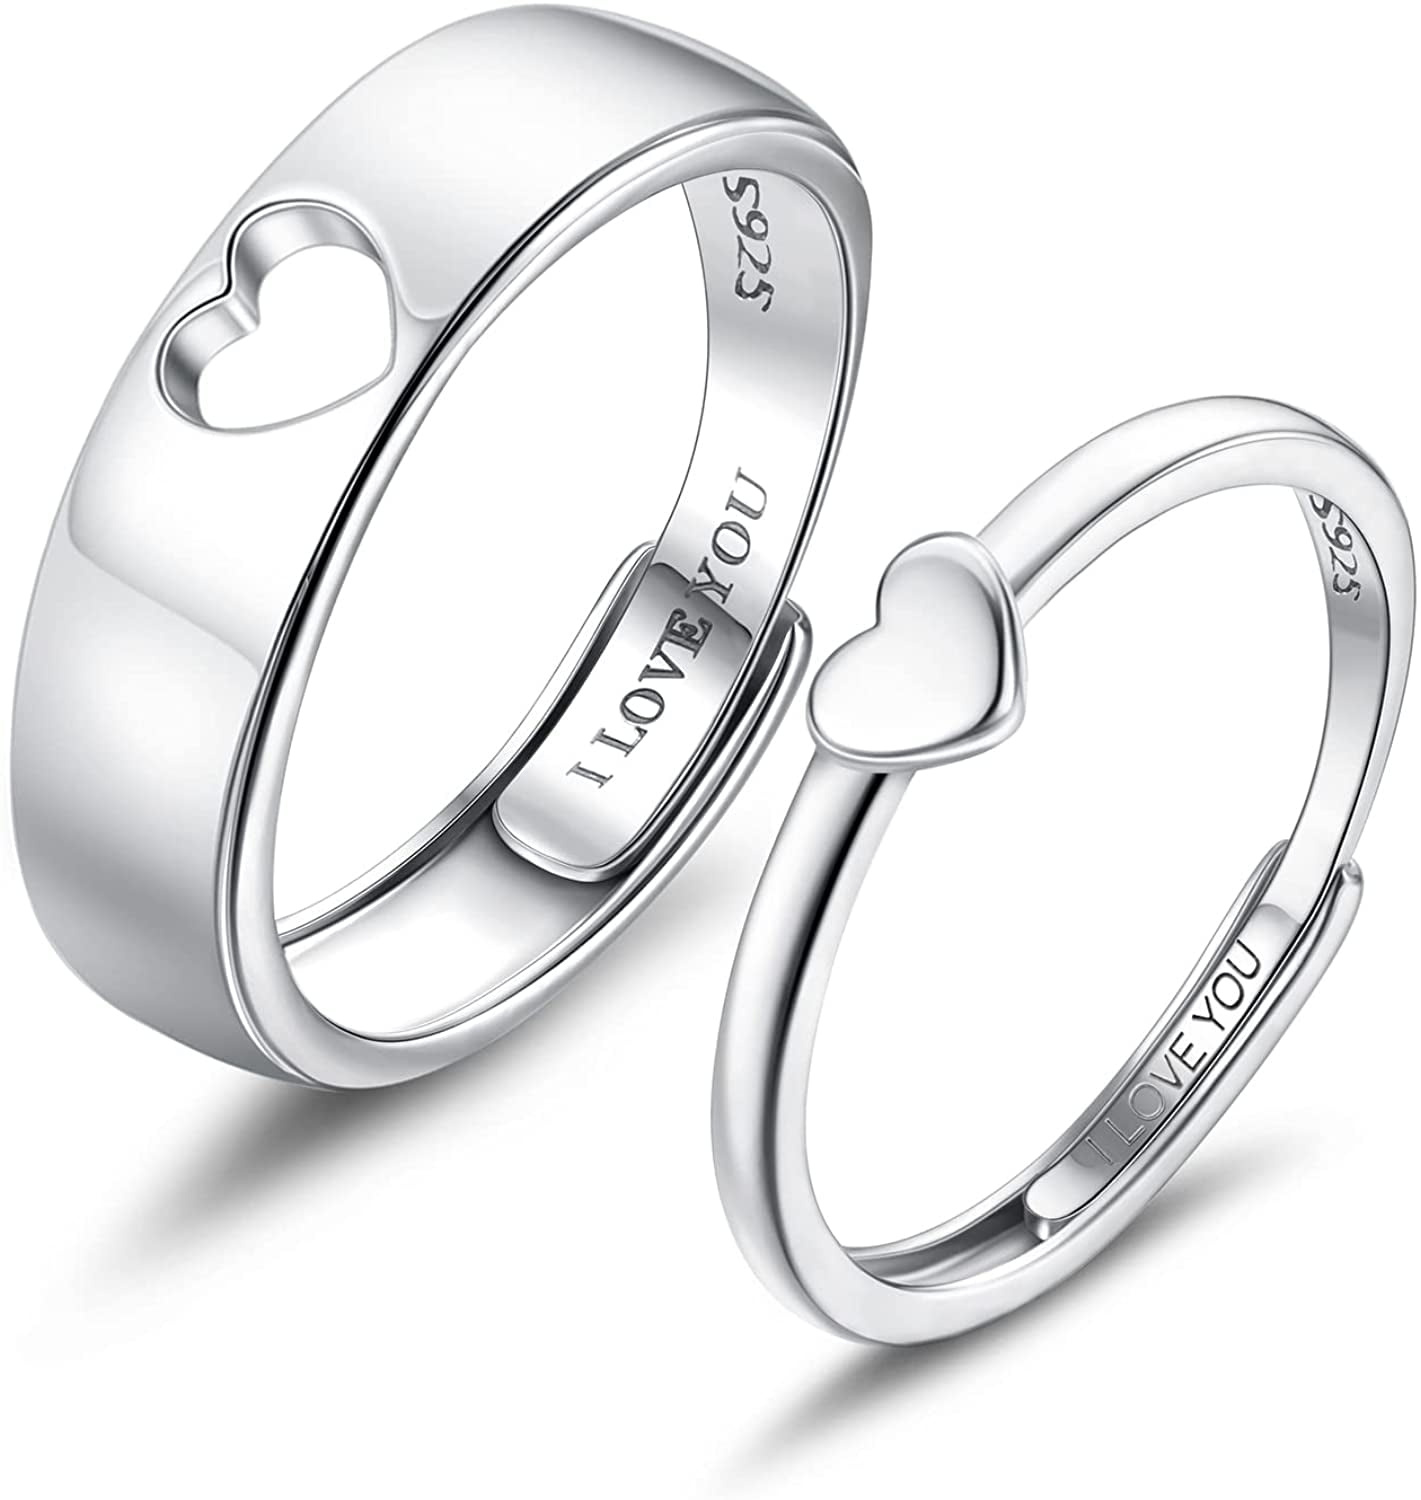 Brilliance Fine Jewelry Promise Rings in The Wedding Shop - Walmart.com